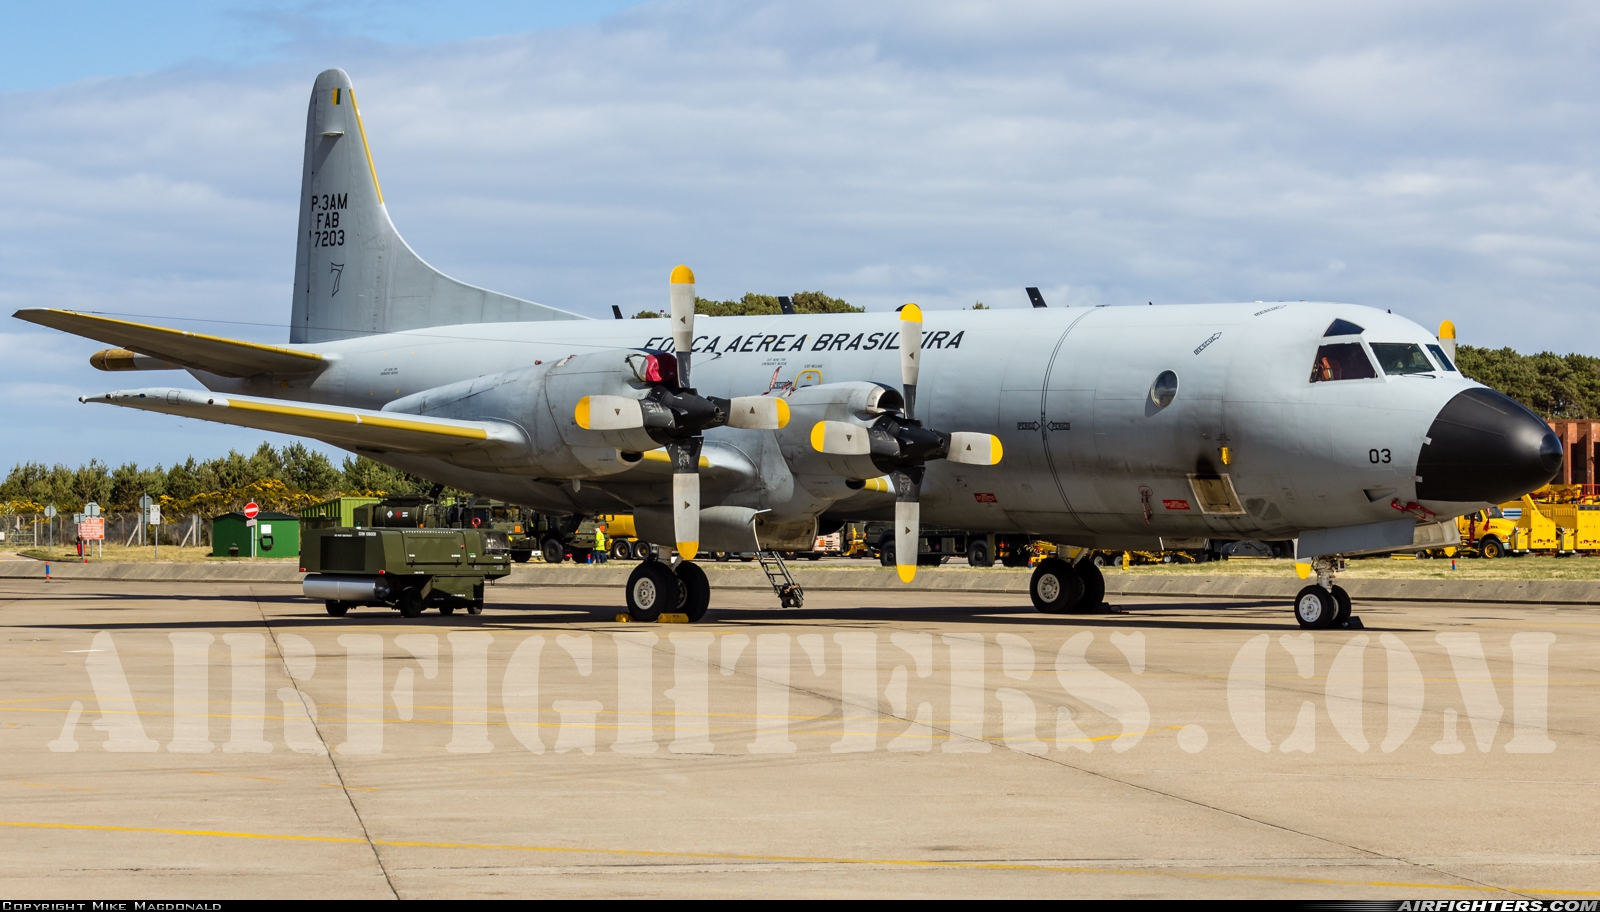 Brazil - Air Force Lockheed P-3AM Orion 7203 at Lossiemouth (LMO / EGQS), UK